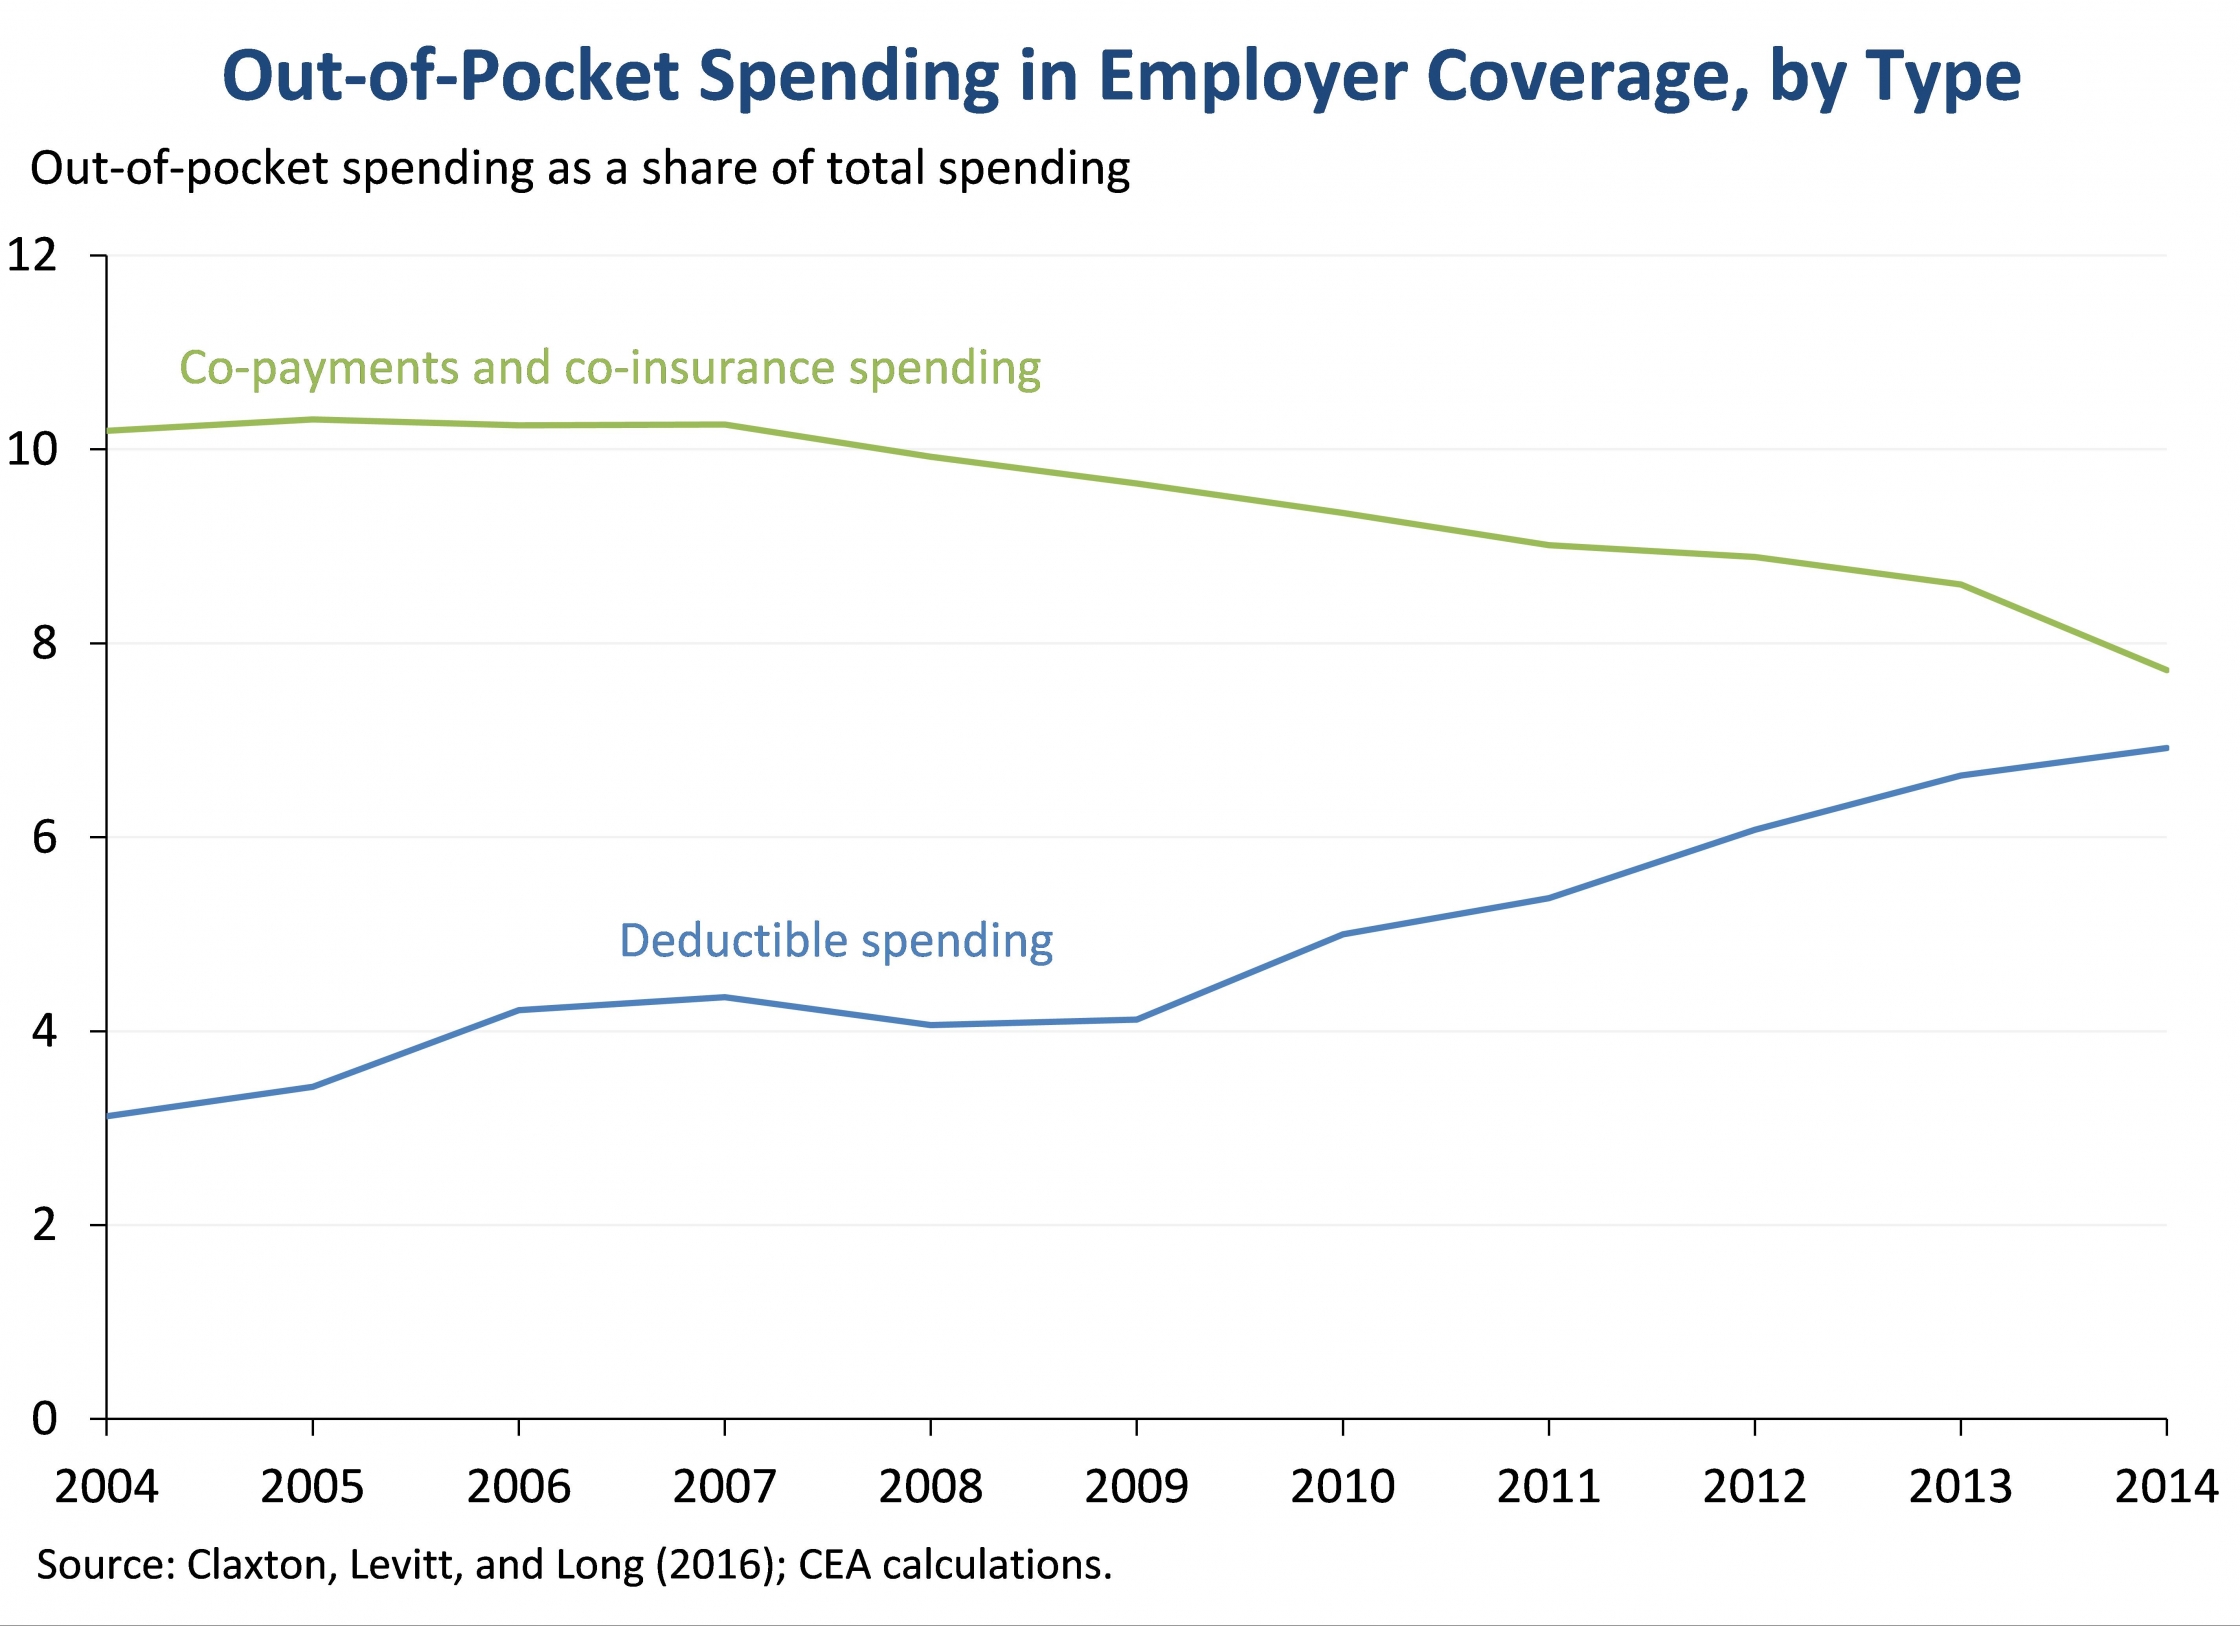 Out-of-Pocket Spending in Employer Coverage, by Type